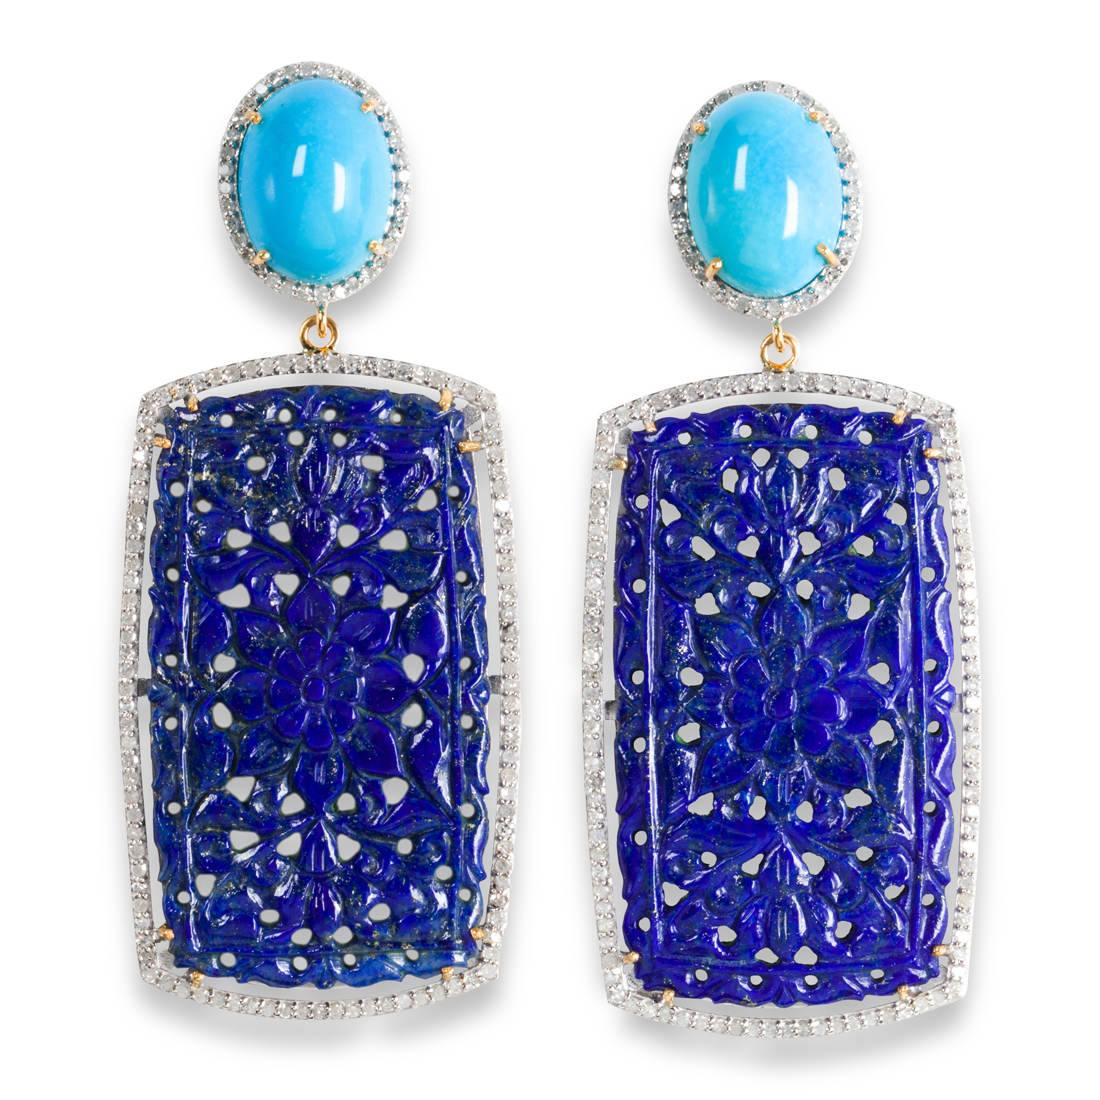 A PAIR OF TURQUOISE LAPIS LAZULI 3a2825